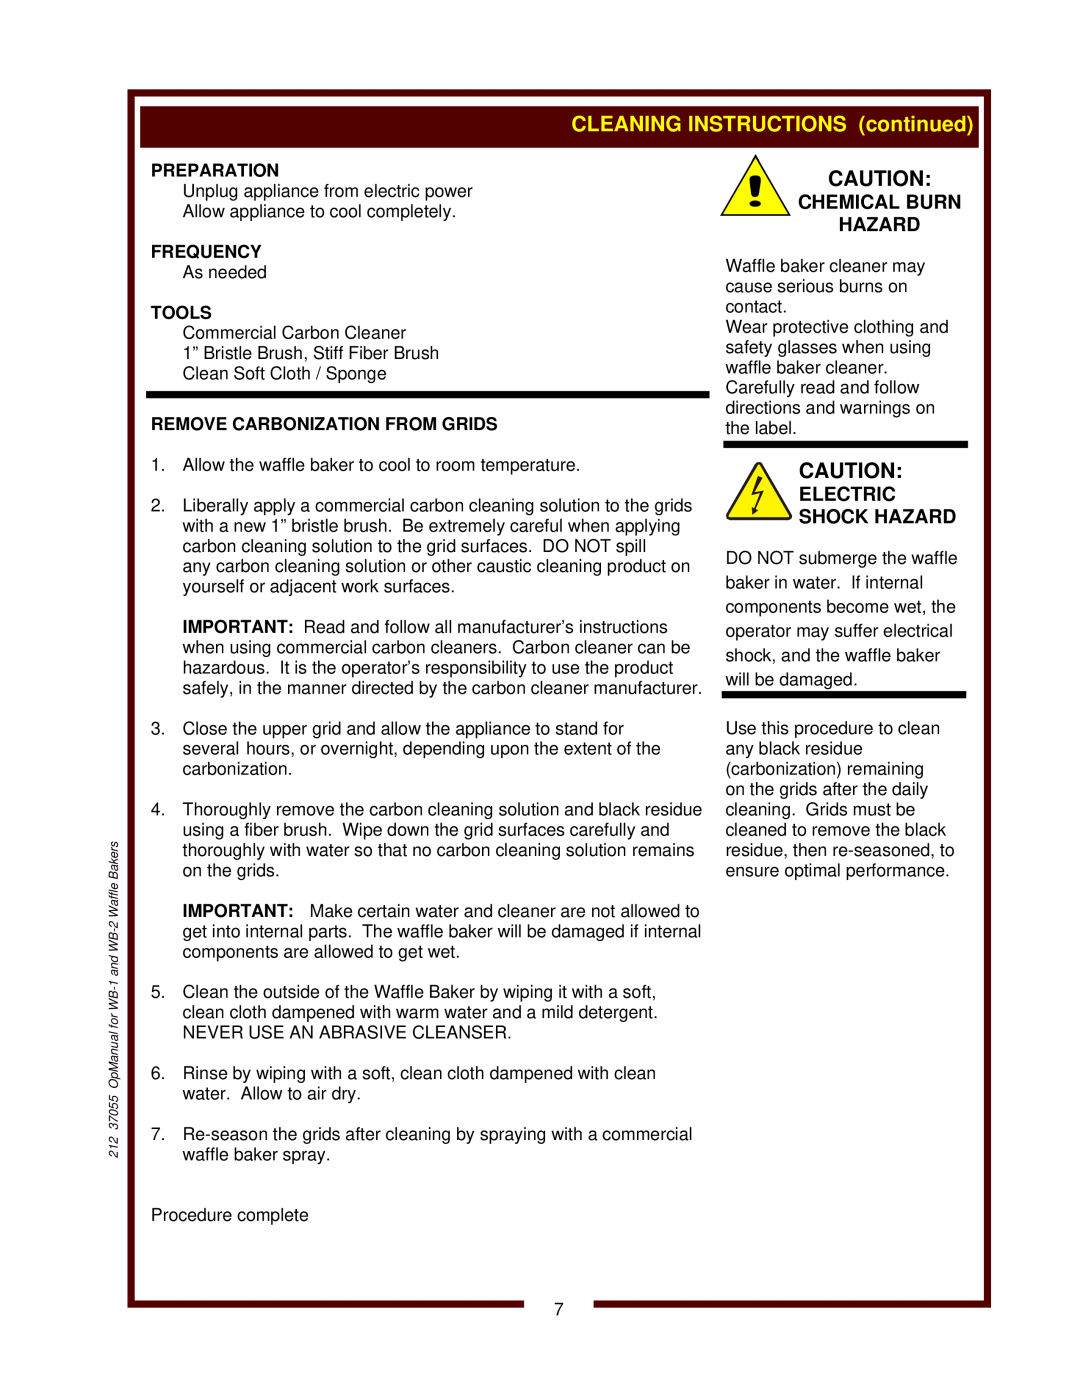 Wells WB-1 CLEANING INSTRUCTIONS continued, Chemical Burn Hazard, Remove Carbonization From Grids, Electric Shock Hazard 